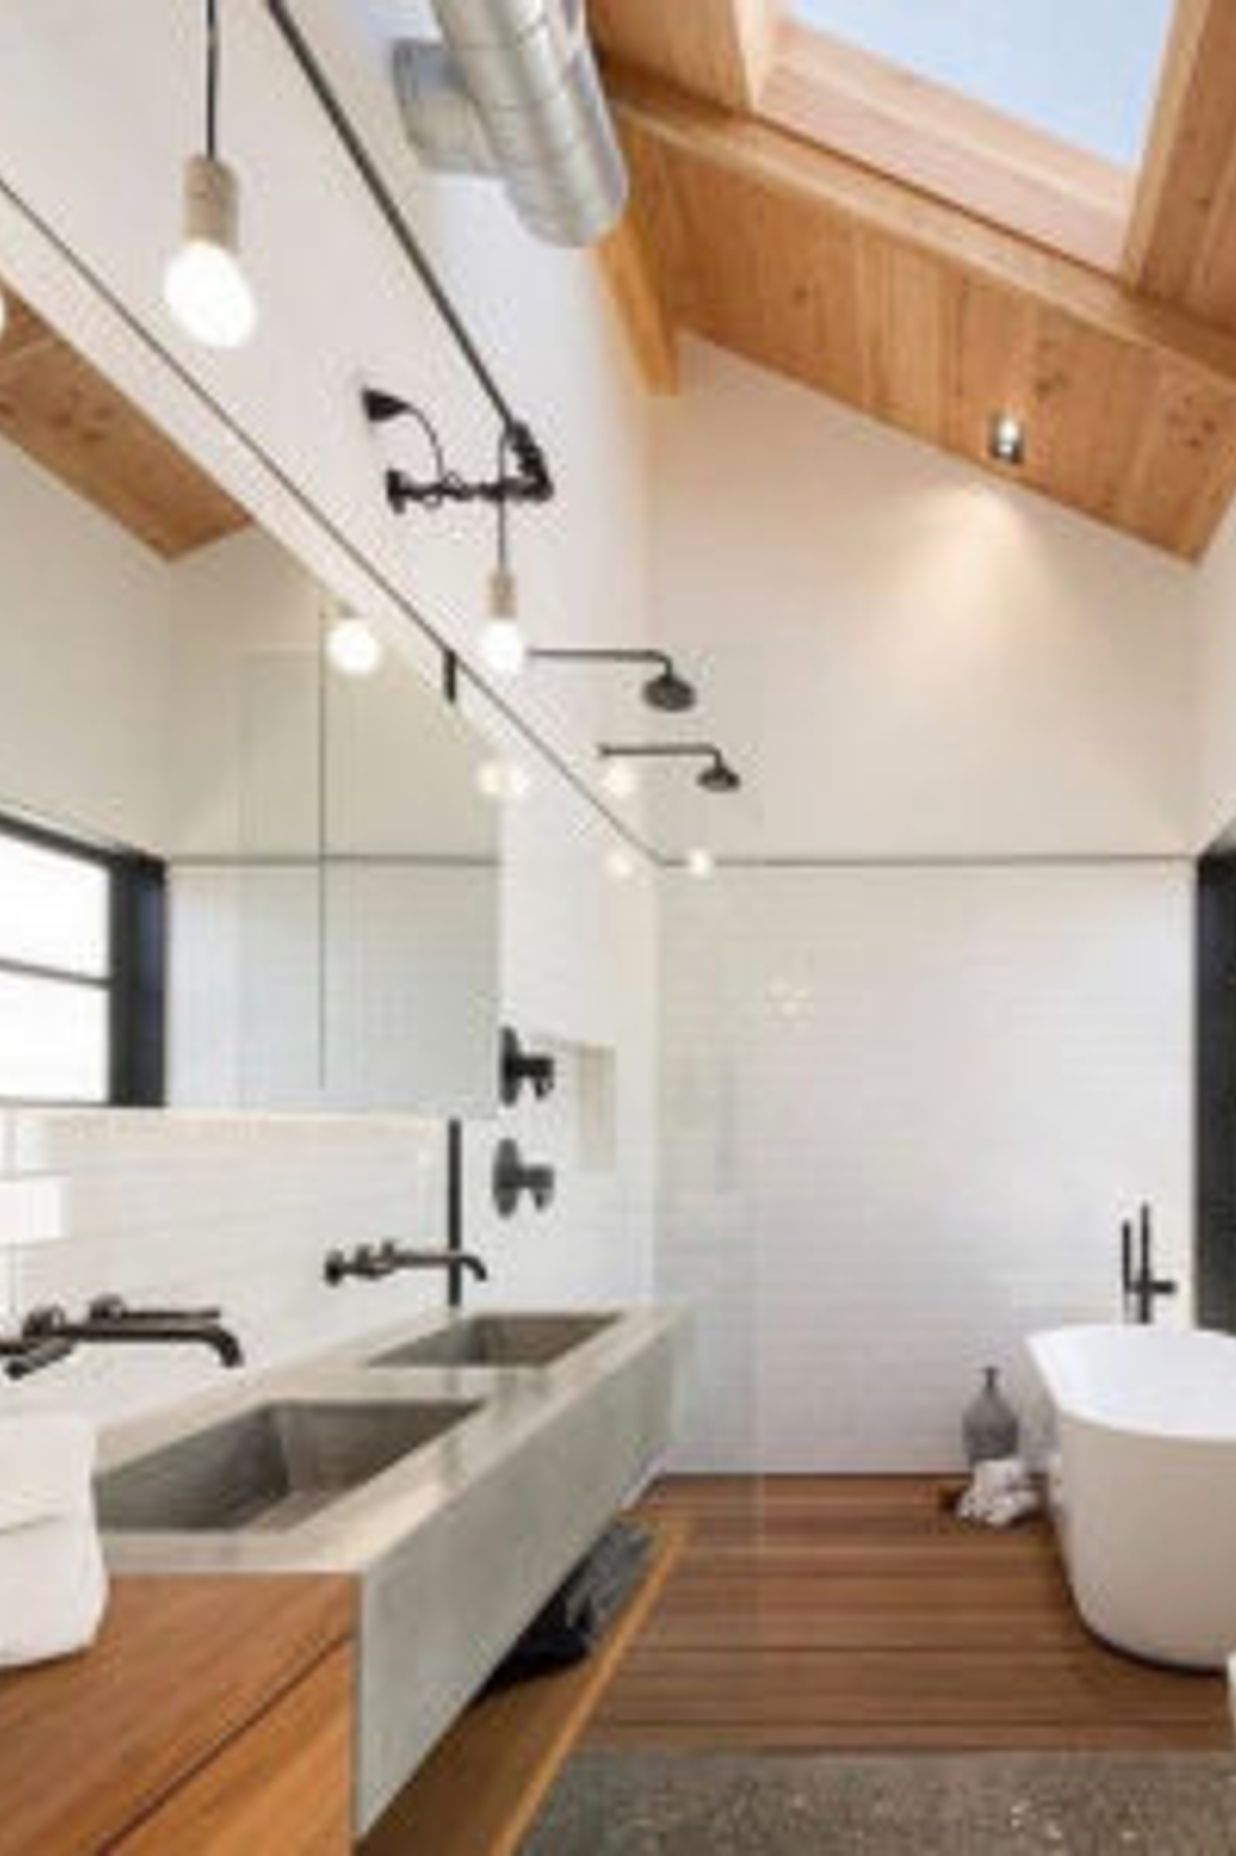 The sklight in this bathroom lets in floods of natural light